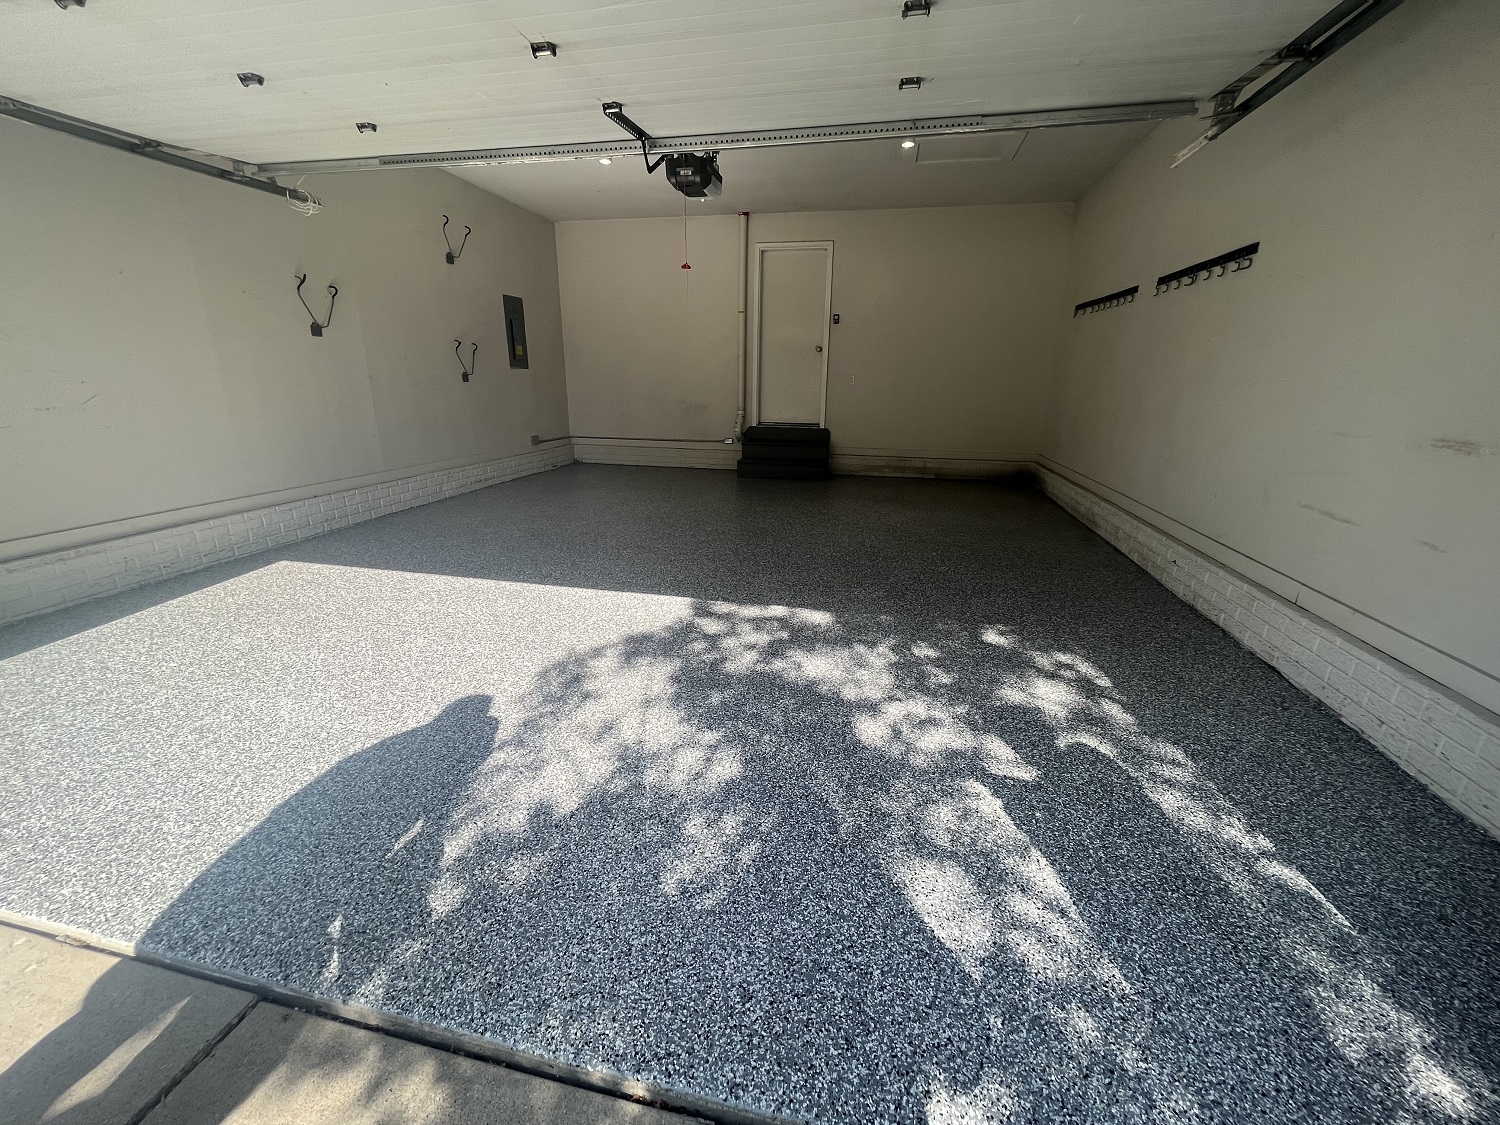 Residential garage floor coating project, after applying the polyaspartic